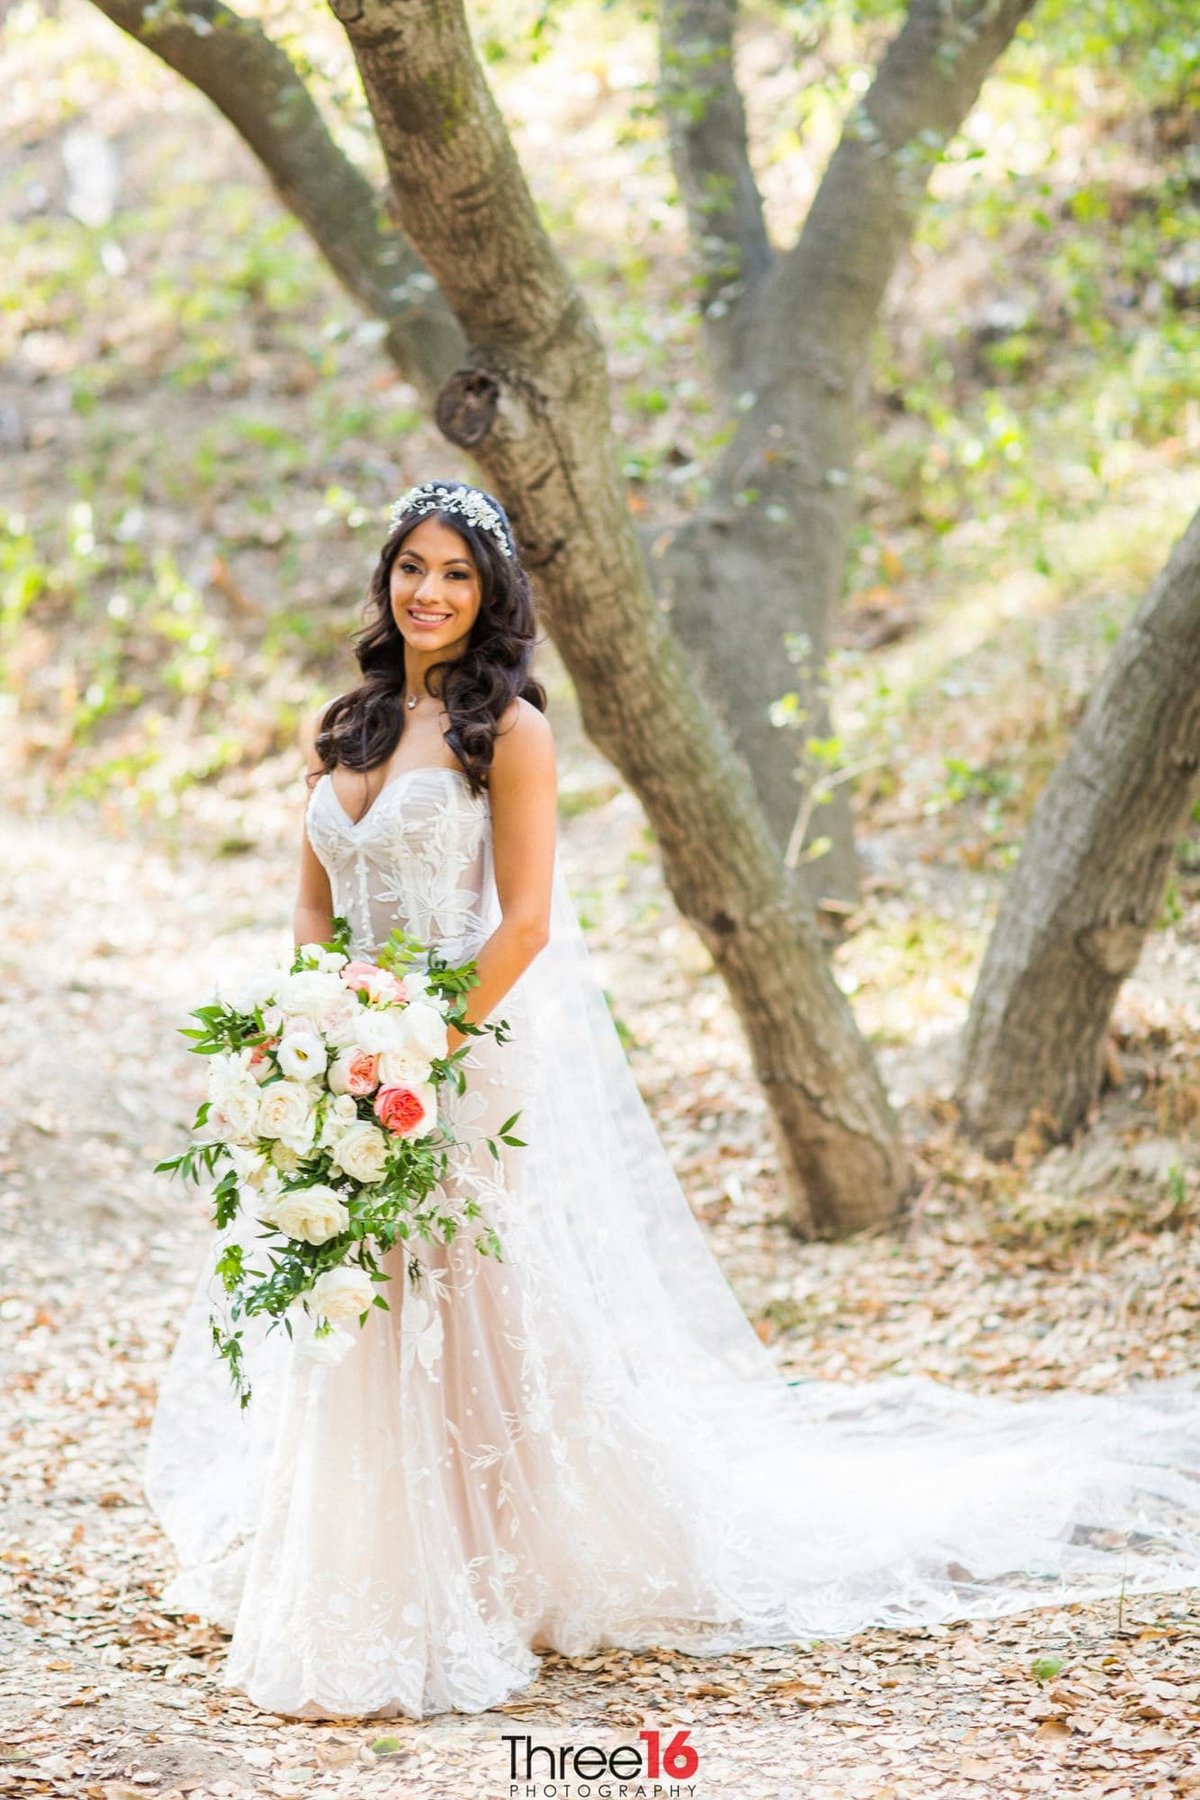 Gorgeous Bride poses for the wedding photographer under the trees